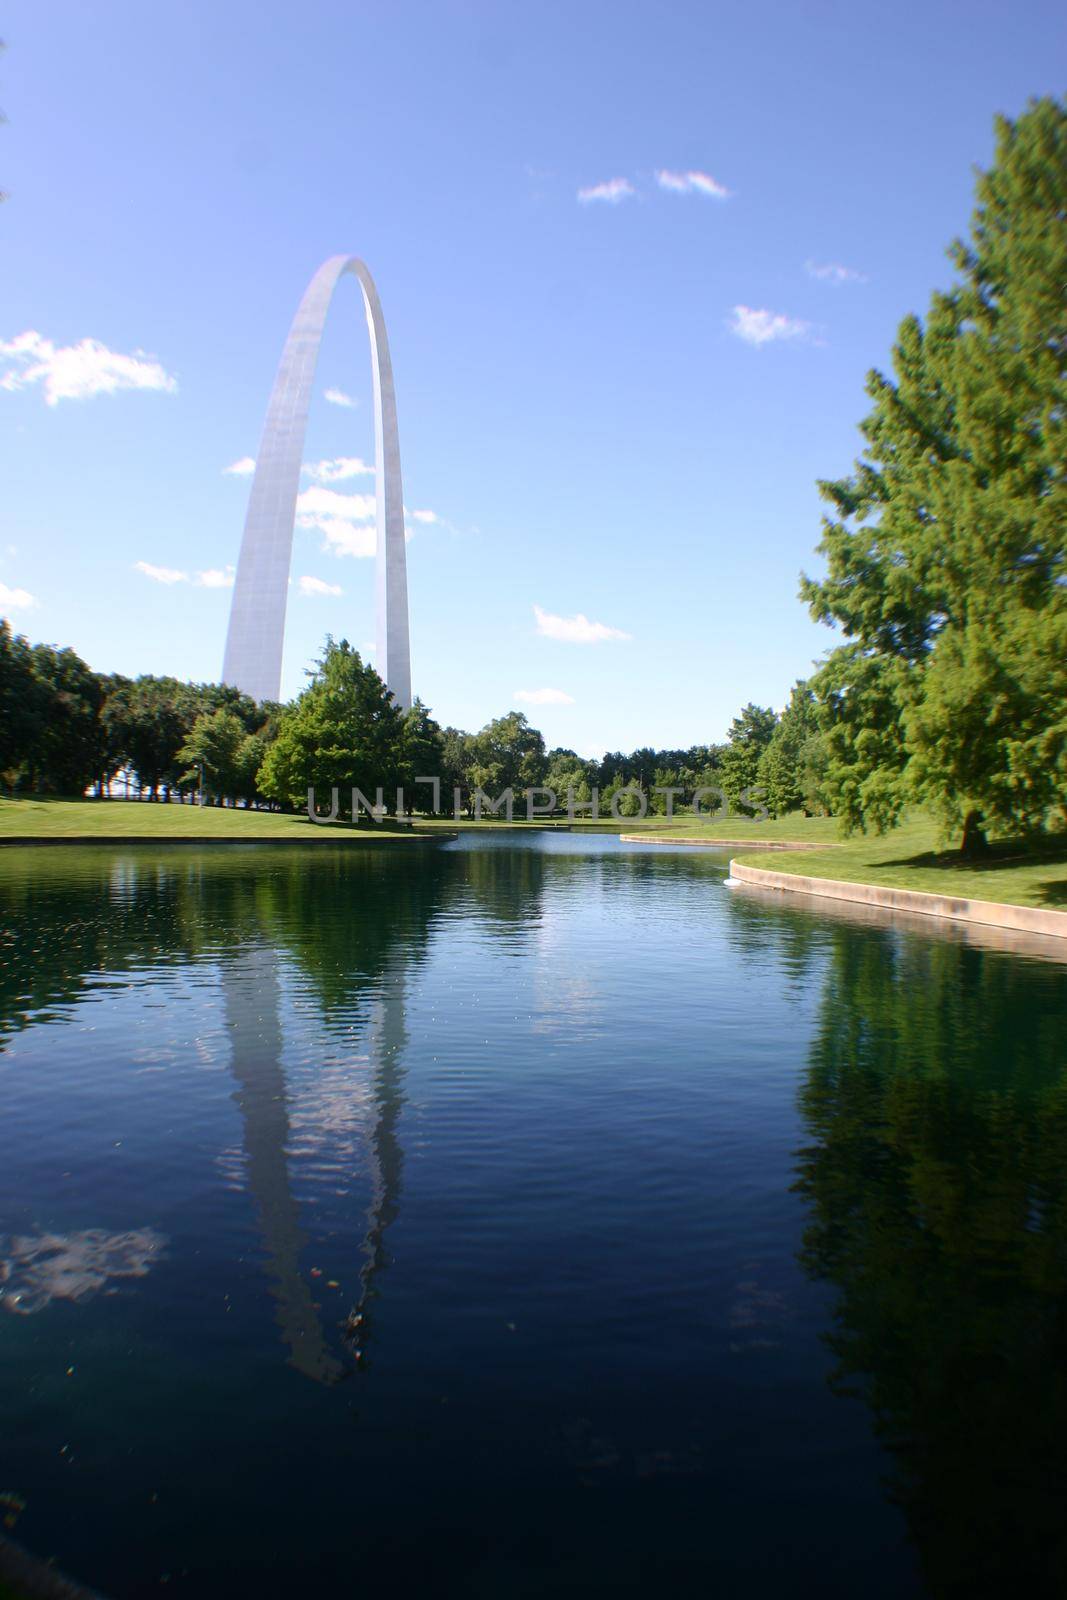 Image of Landscape shot of the St Louis Arch reflected in a lake neaer a group of trees